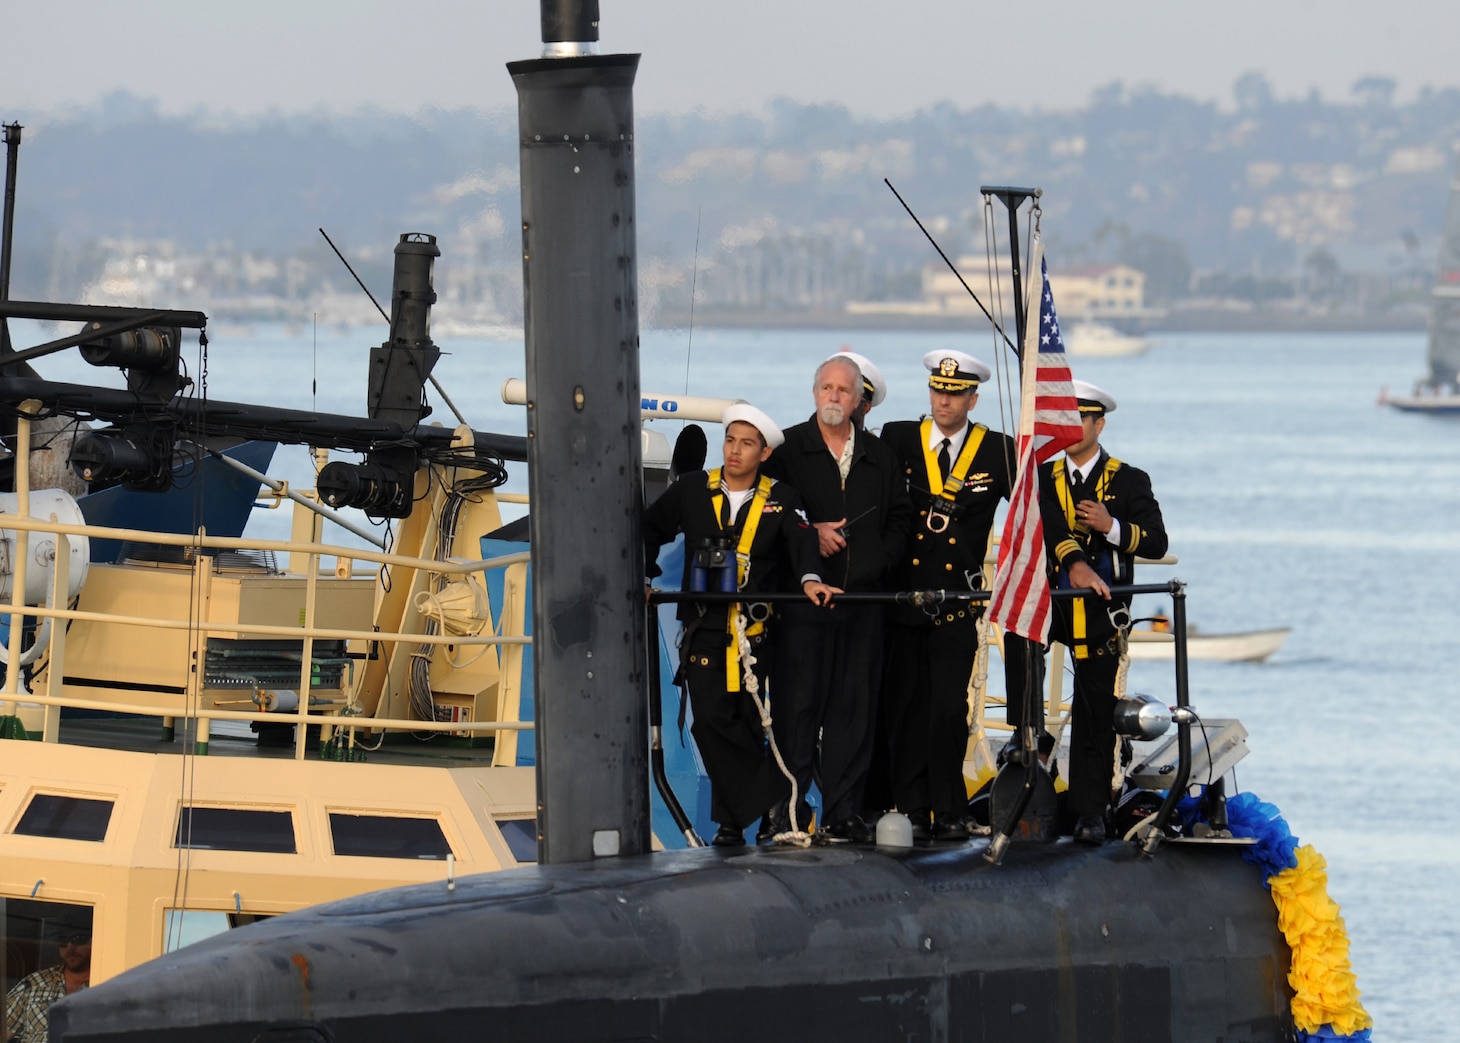 SAN DIEGO (December 18, 2013)  Cdr. Lincoln Reifsteck, commanding officer of the Los Angeles-class attack submarine USS Hampton (SSN 767) stands on the bridge as the Hampton pulls pierside following a six-month deployment to the western Pacific region. U.S. Navy photo by Mass Communication Specialist 2nd Class Kyle Carlstrom (Released)